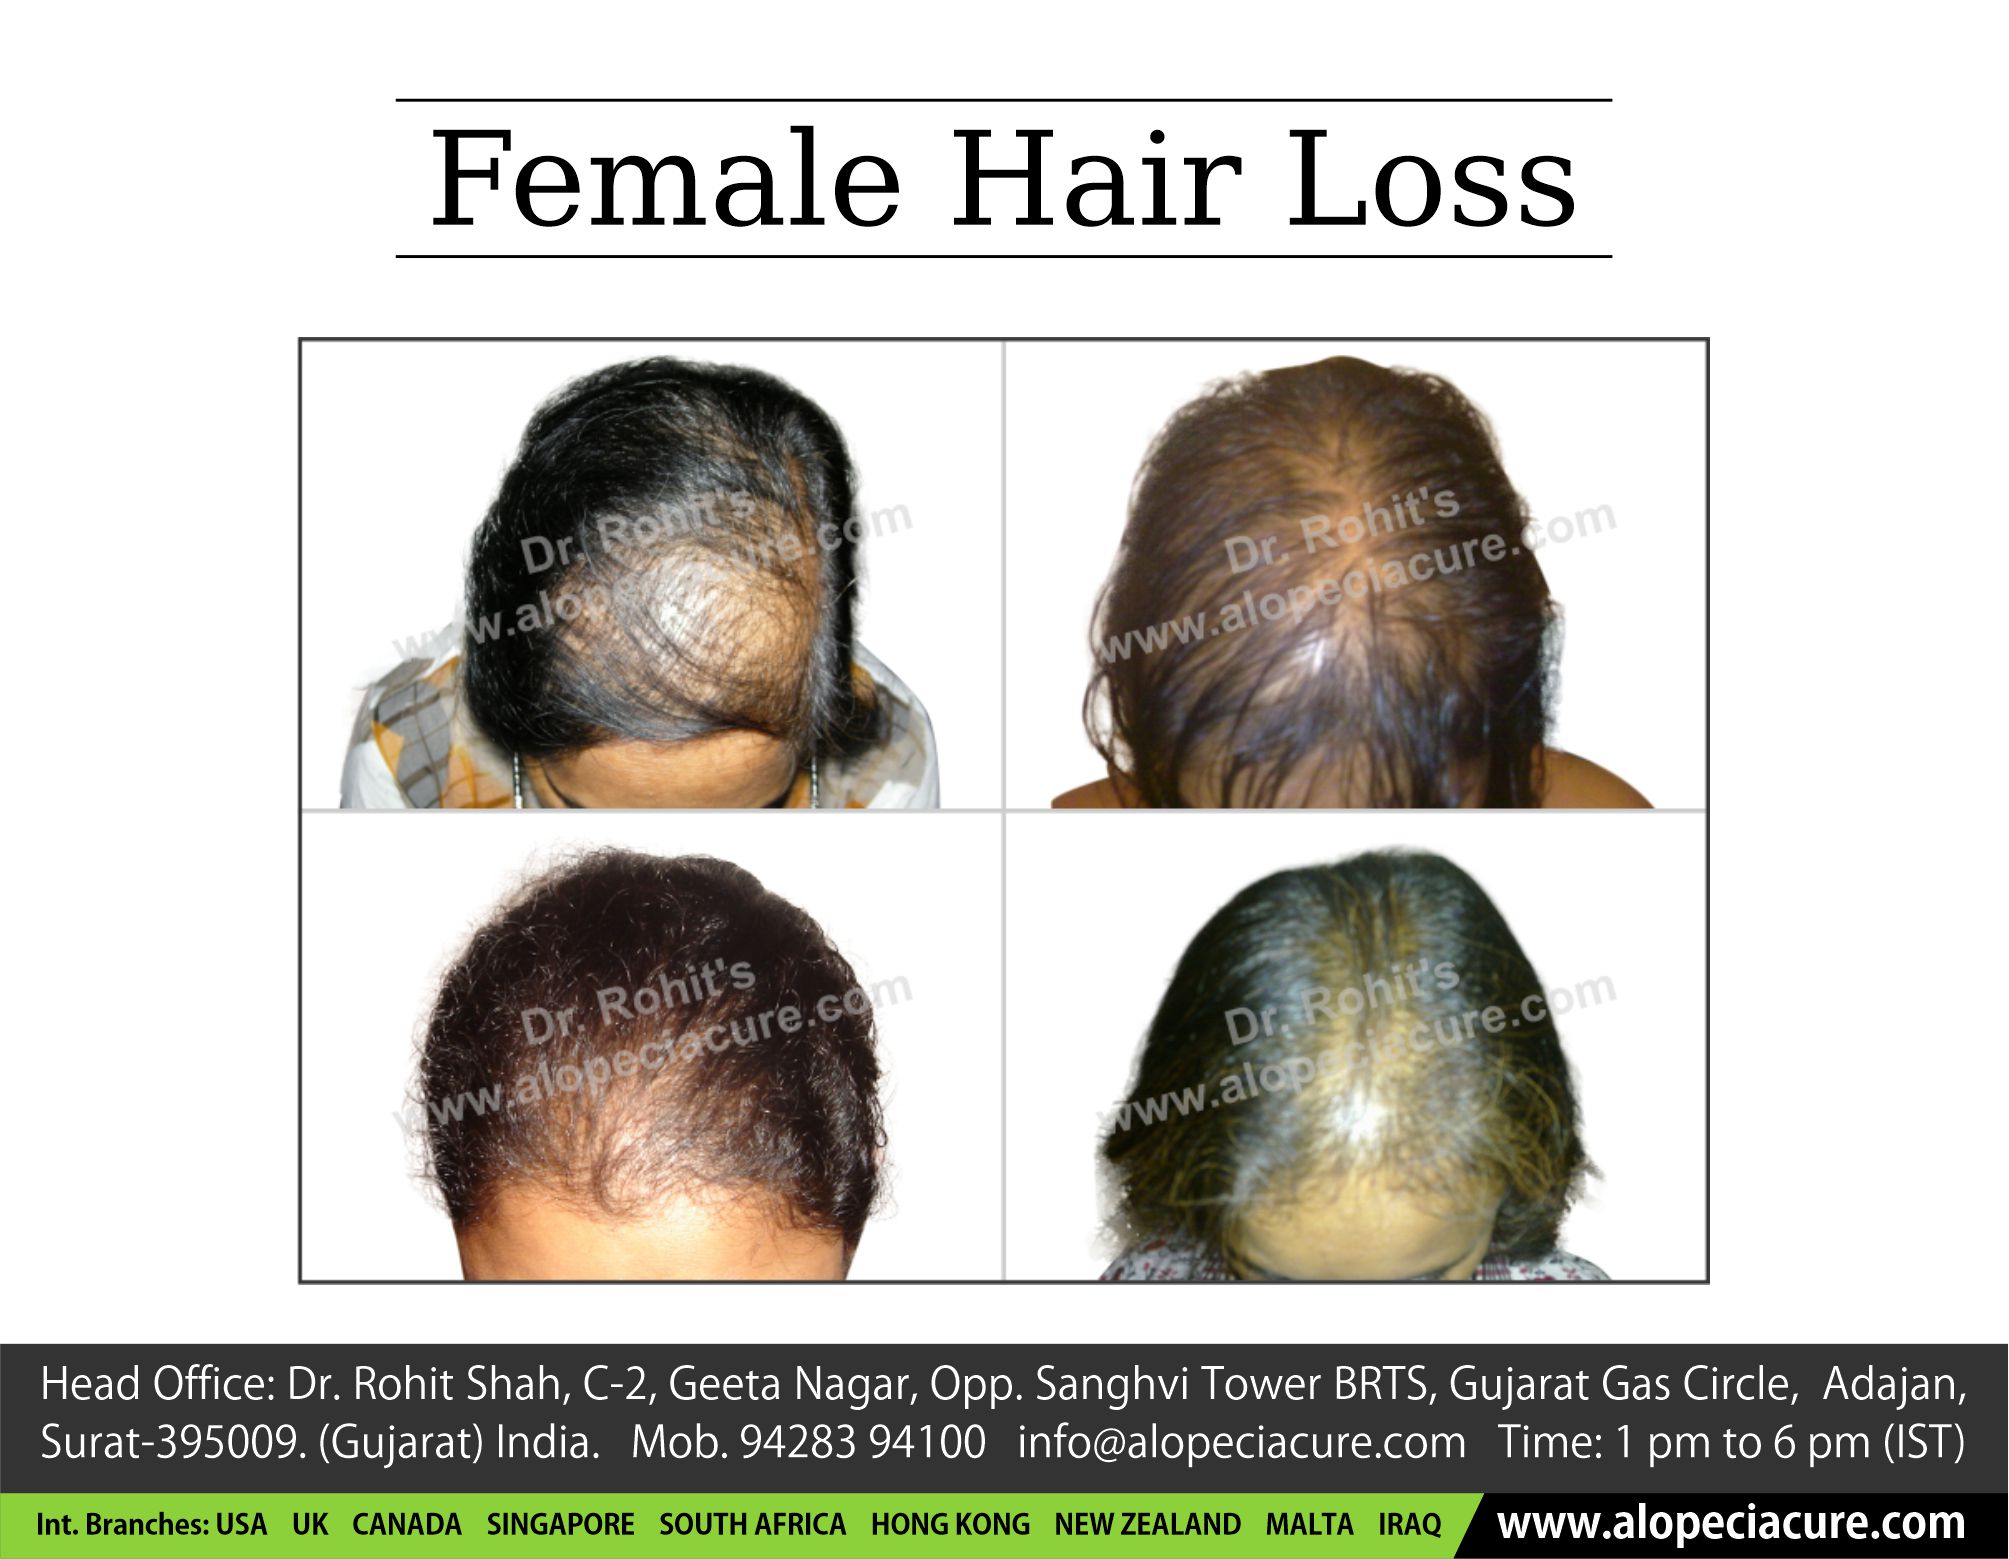 What are the female baldness causes? - hairmd